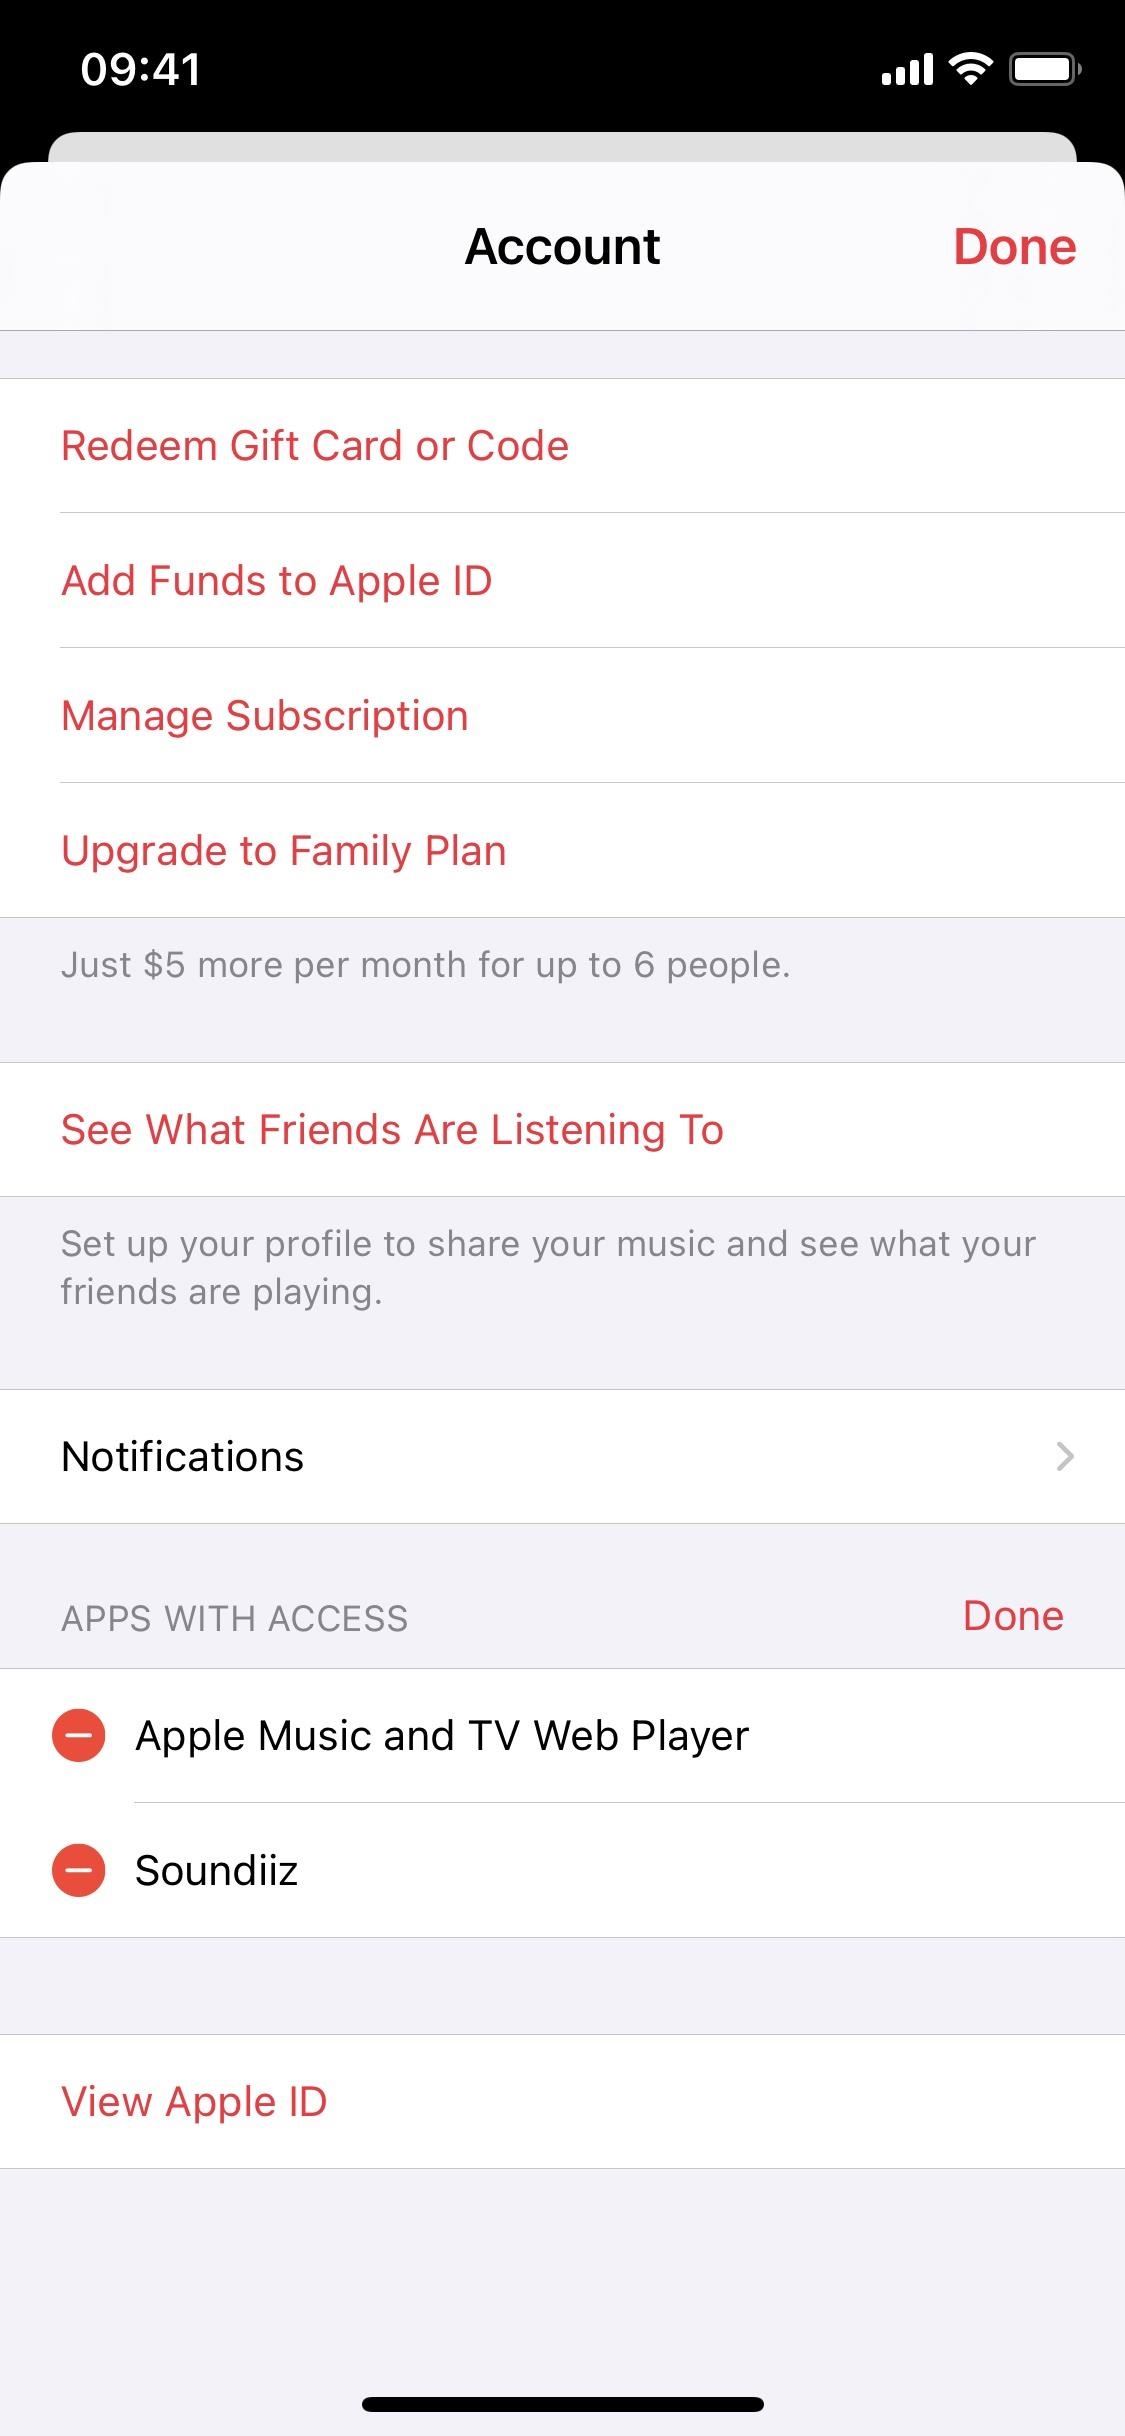 Apps & Services May Have Access to Your Apple Music & Media Library — Here's How to Check & Revoke Their Permissions